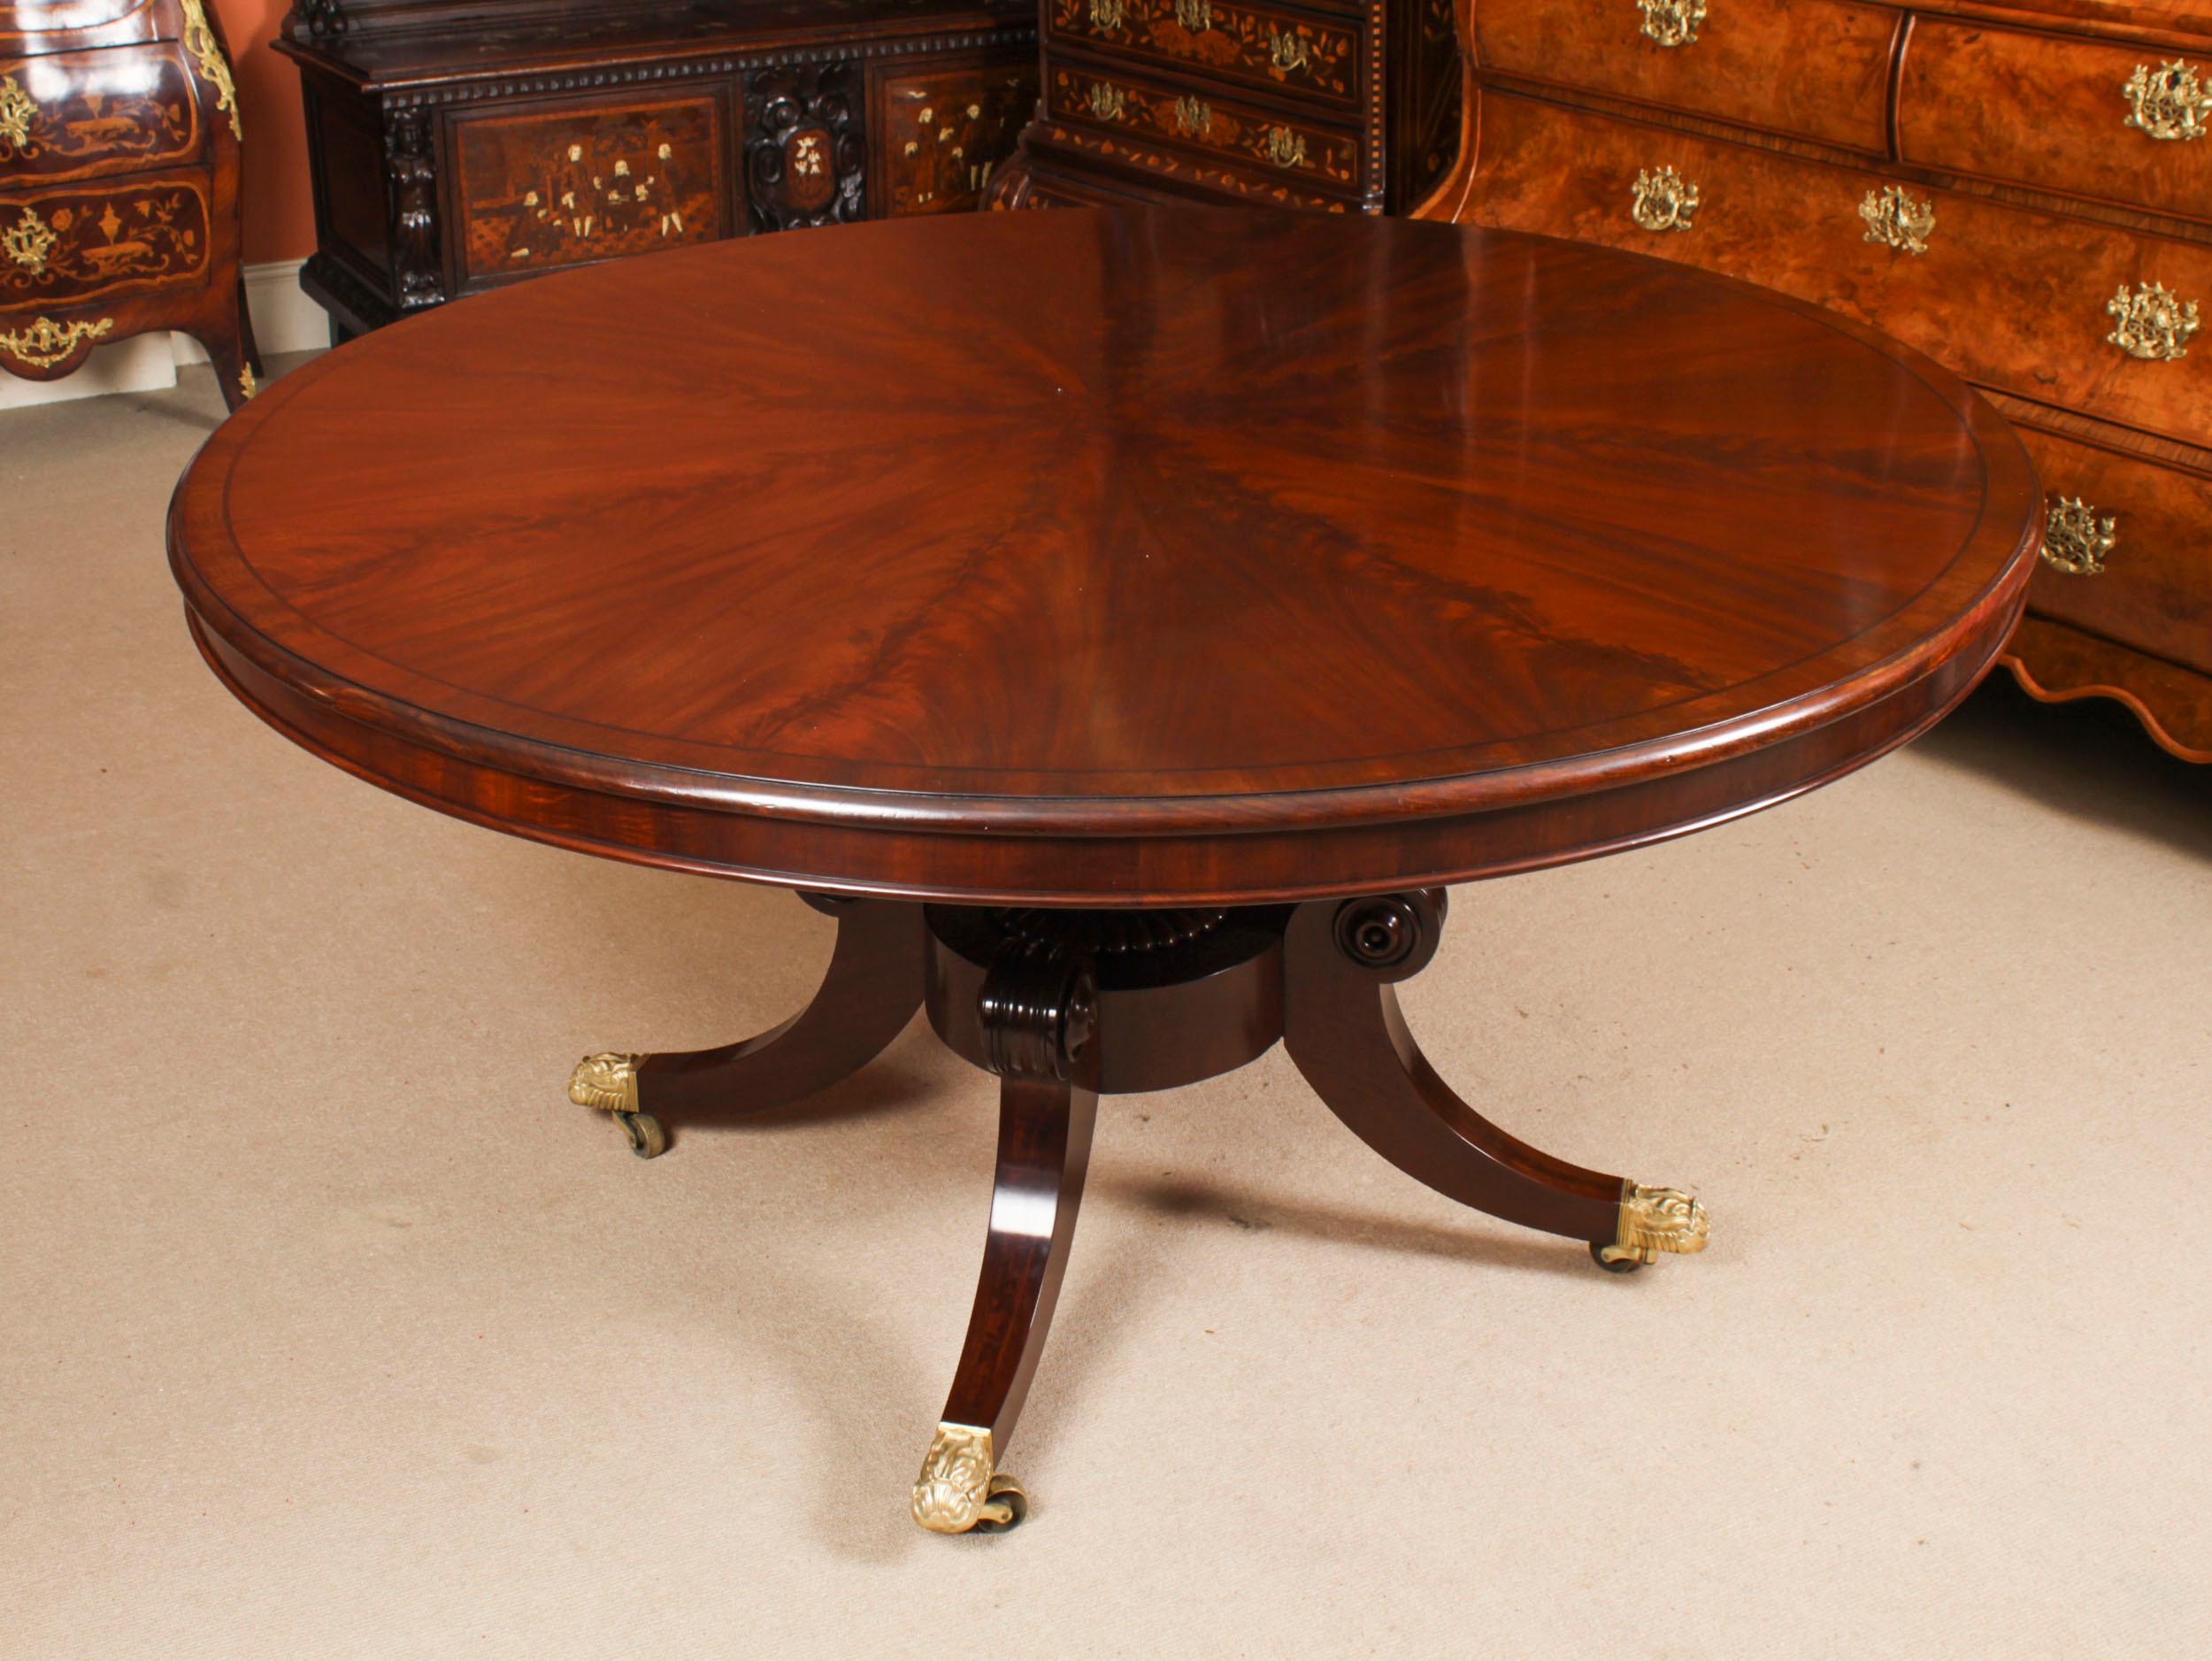 Mahogany Antique William IV Loo Dining Table & 6 chairs 19th Century For Sale